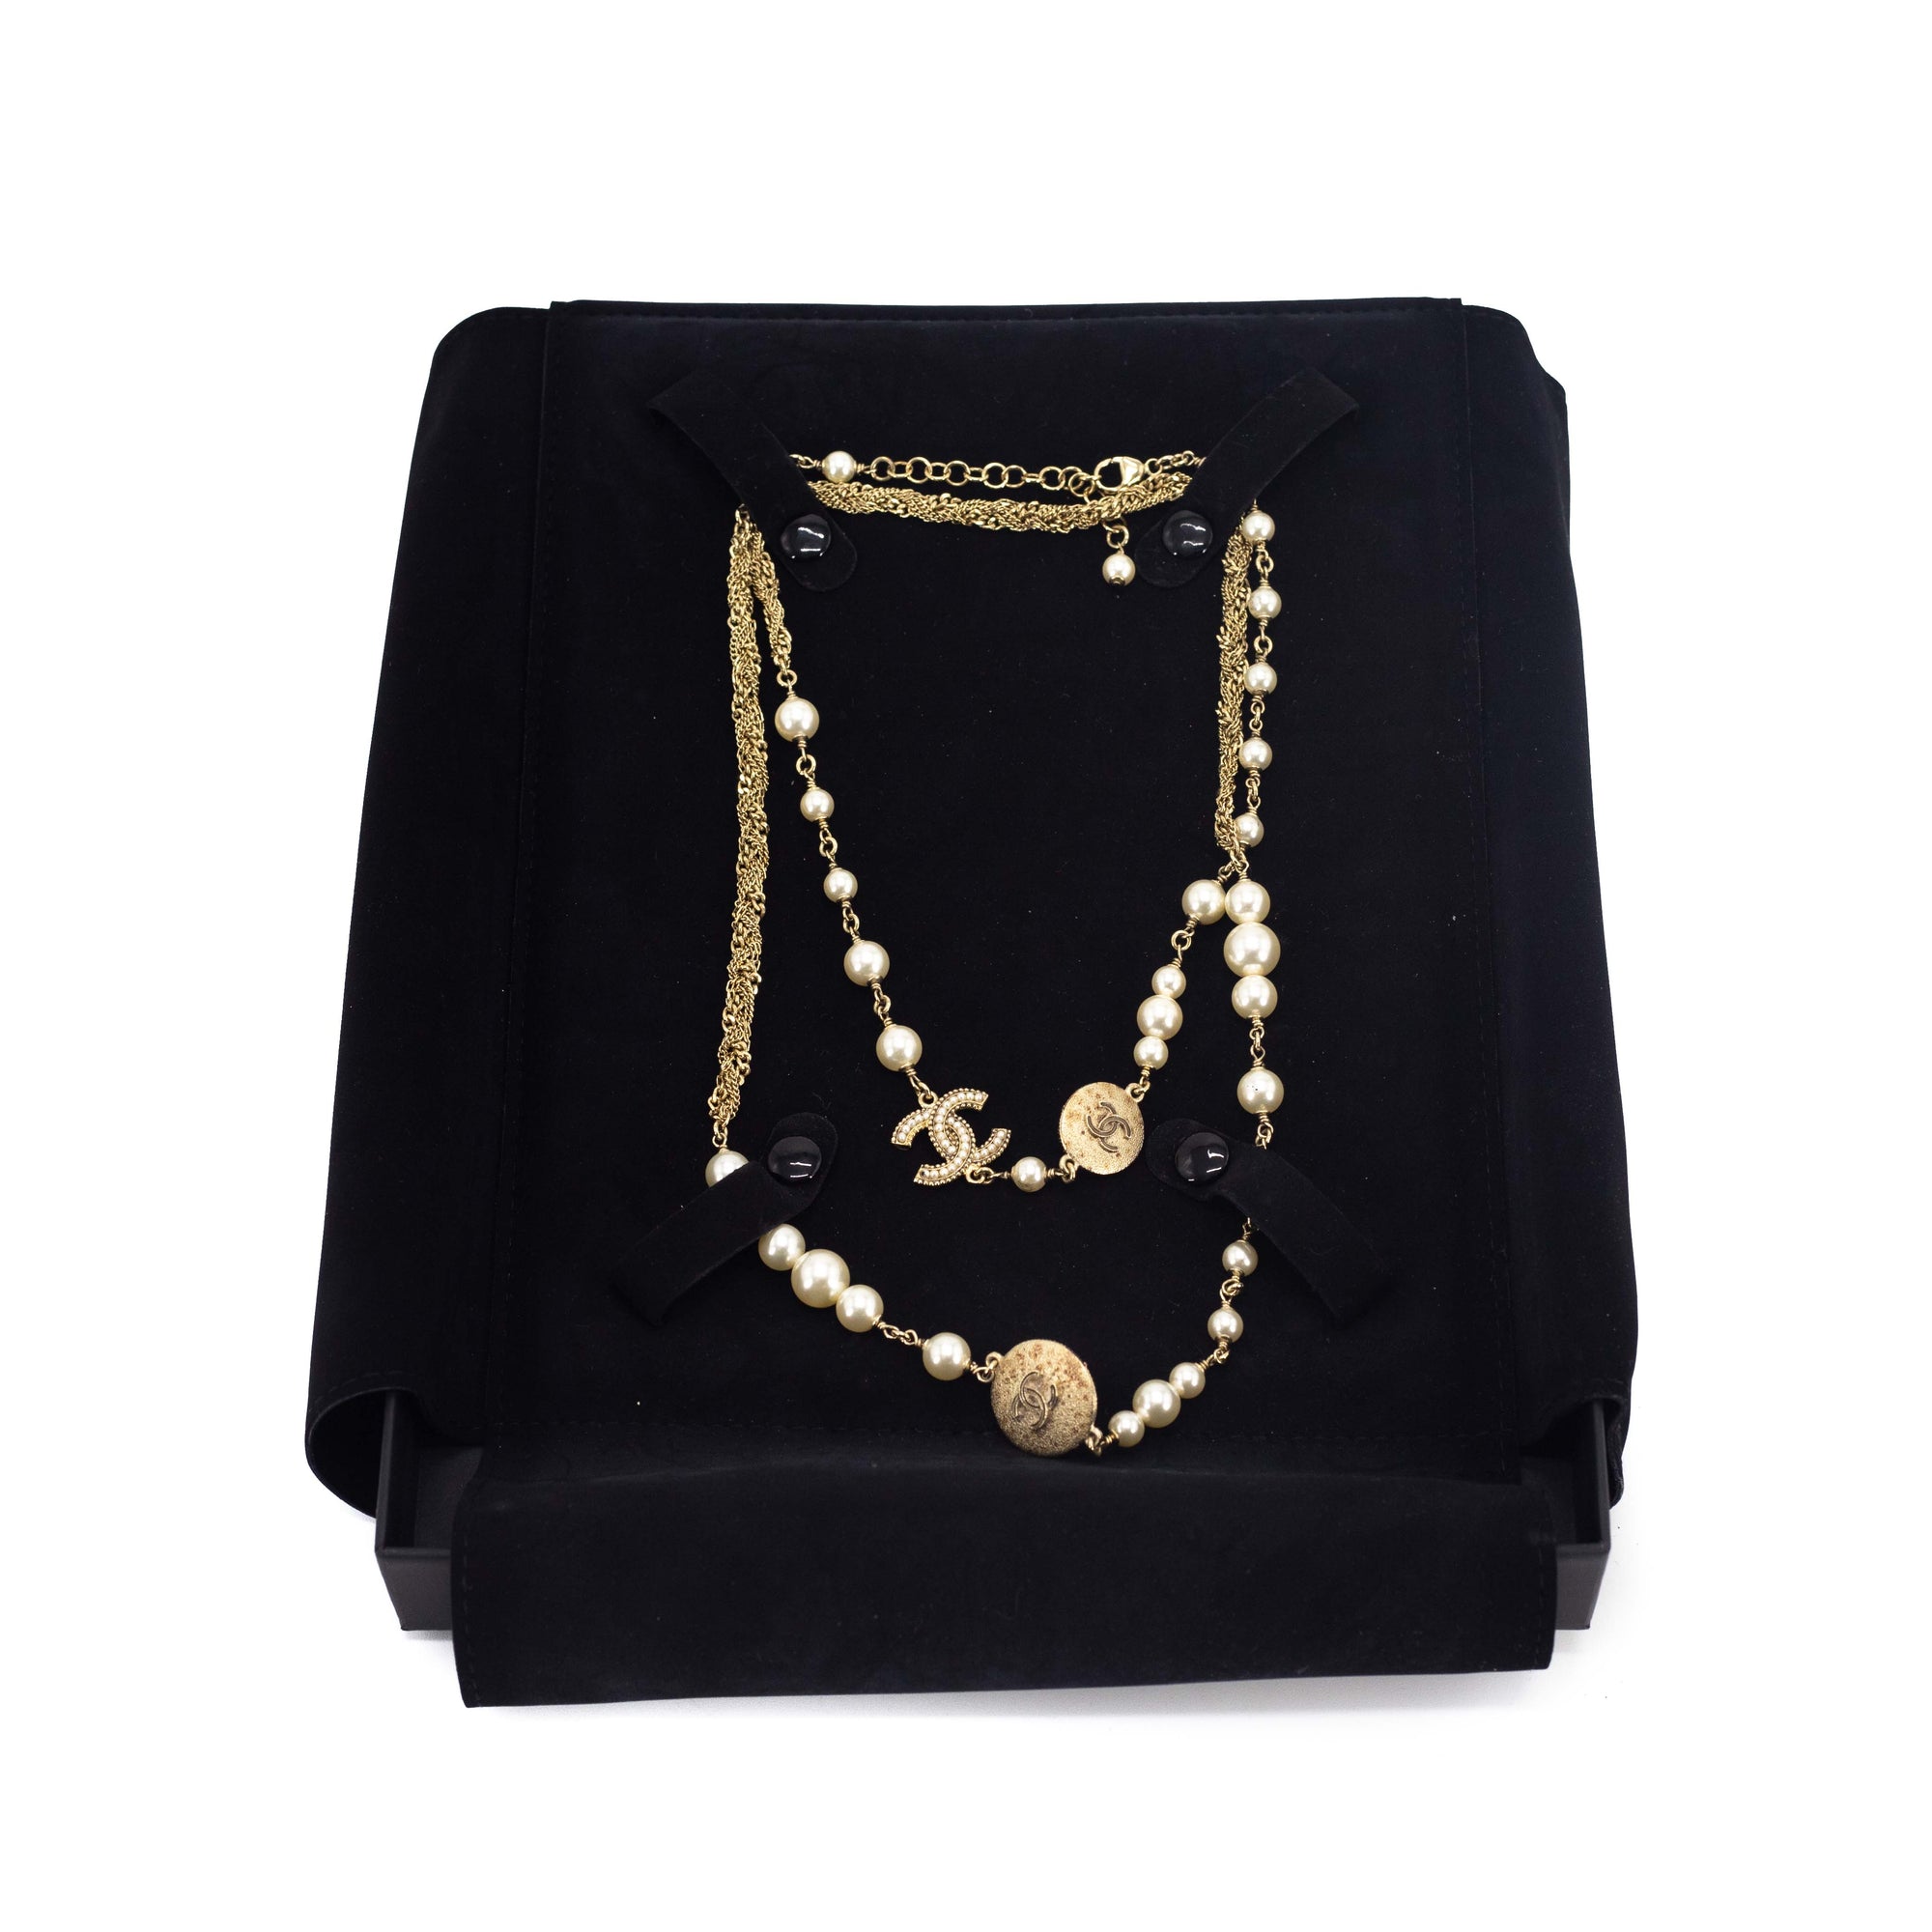 Gorgeous Chanel Long Pearl Necklace  Authentic  eBay